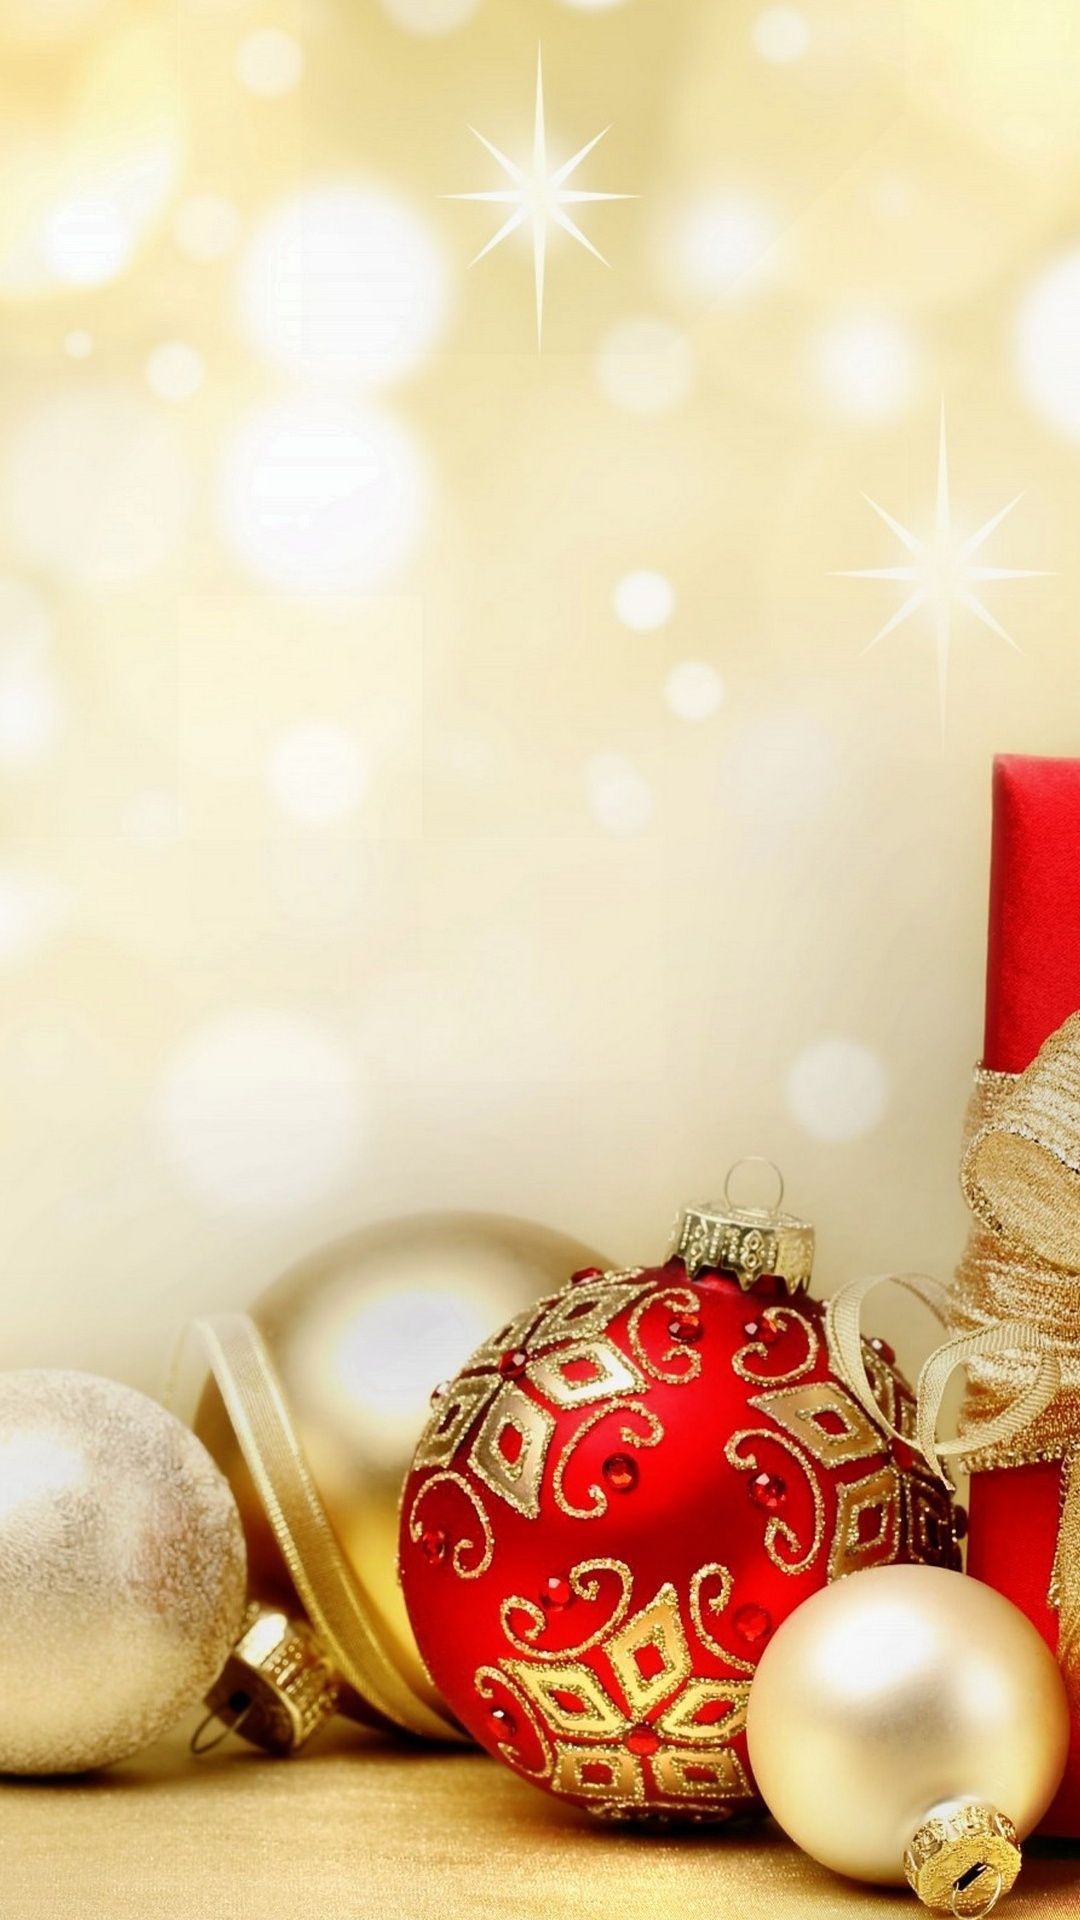 Silver And Gold Christmas Wallpapers - Wallpaper Cave